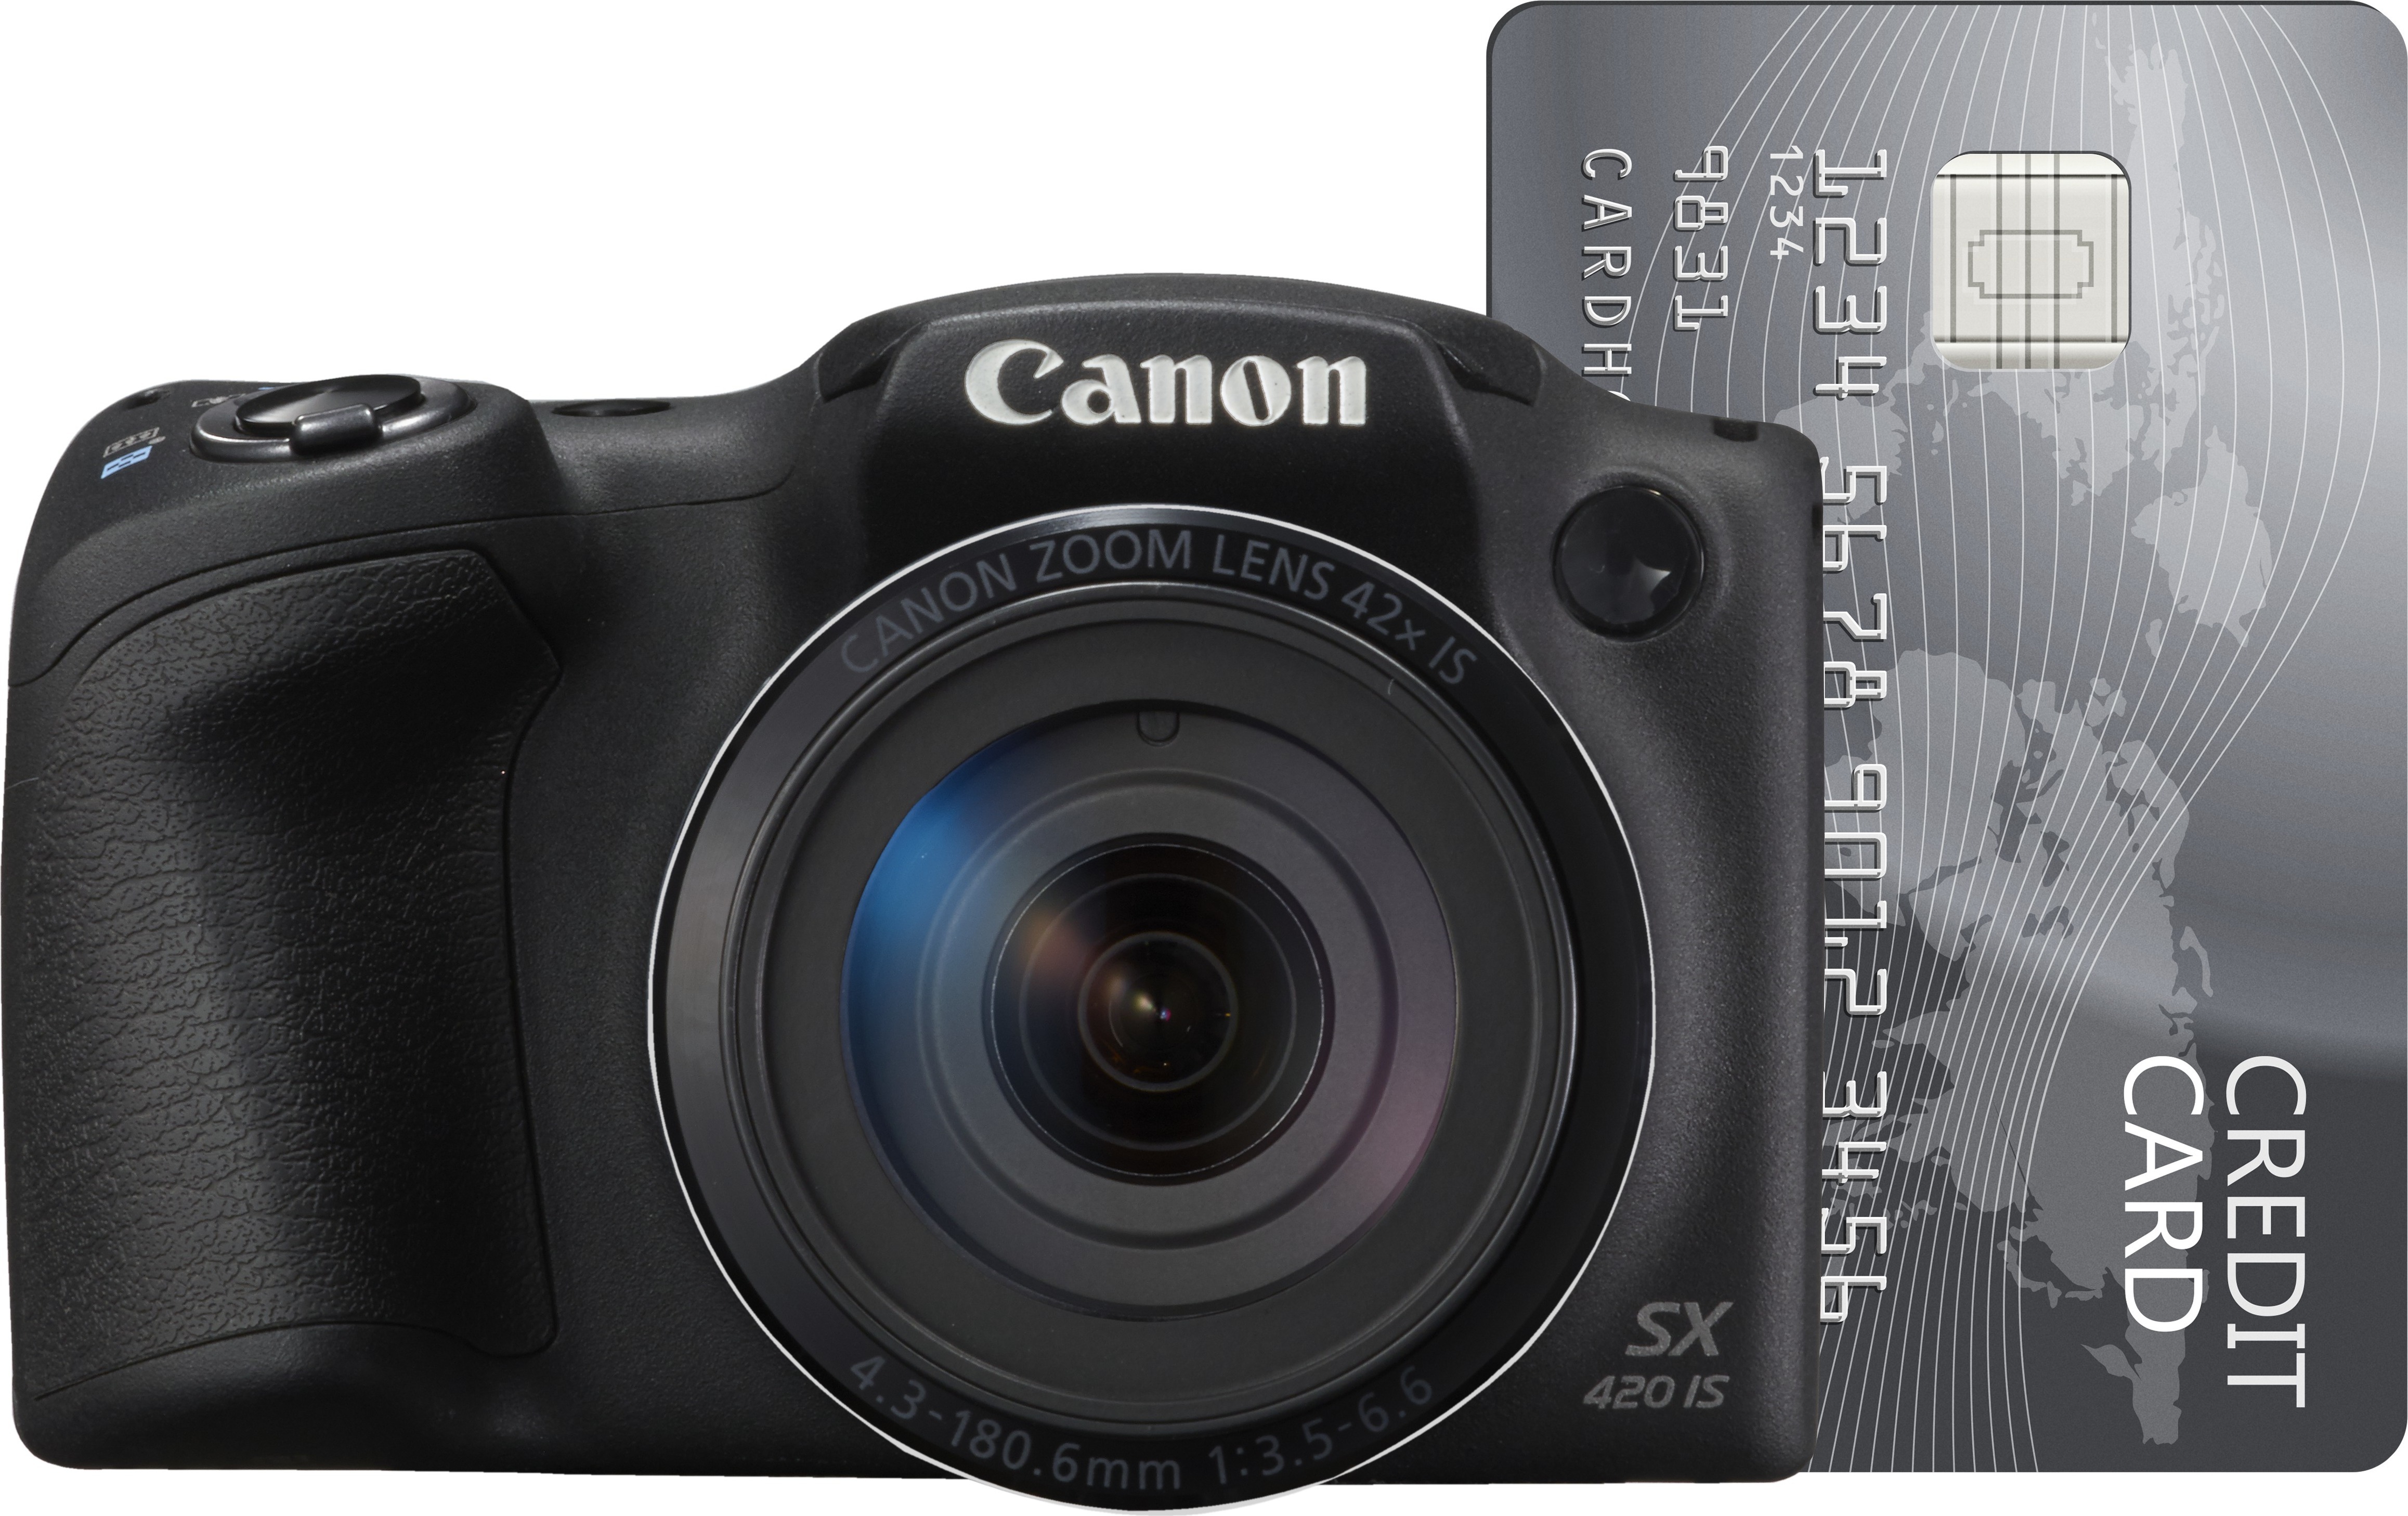 Canon PowerShot SX420 IS | Full Specifications